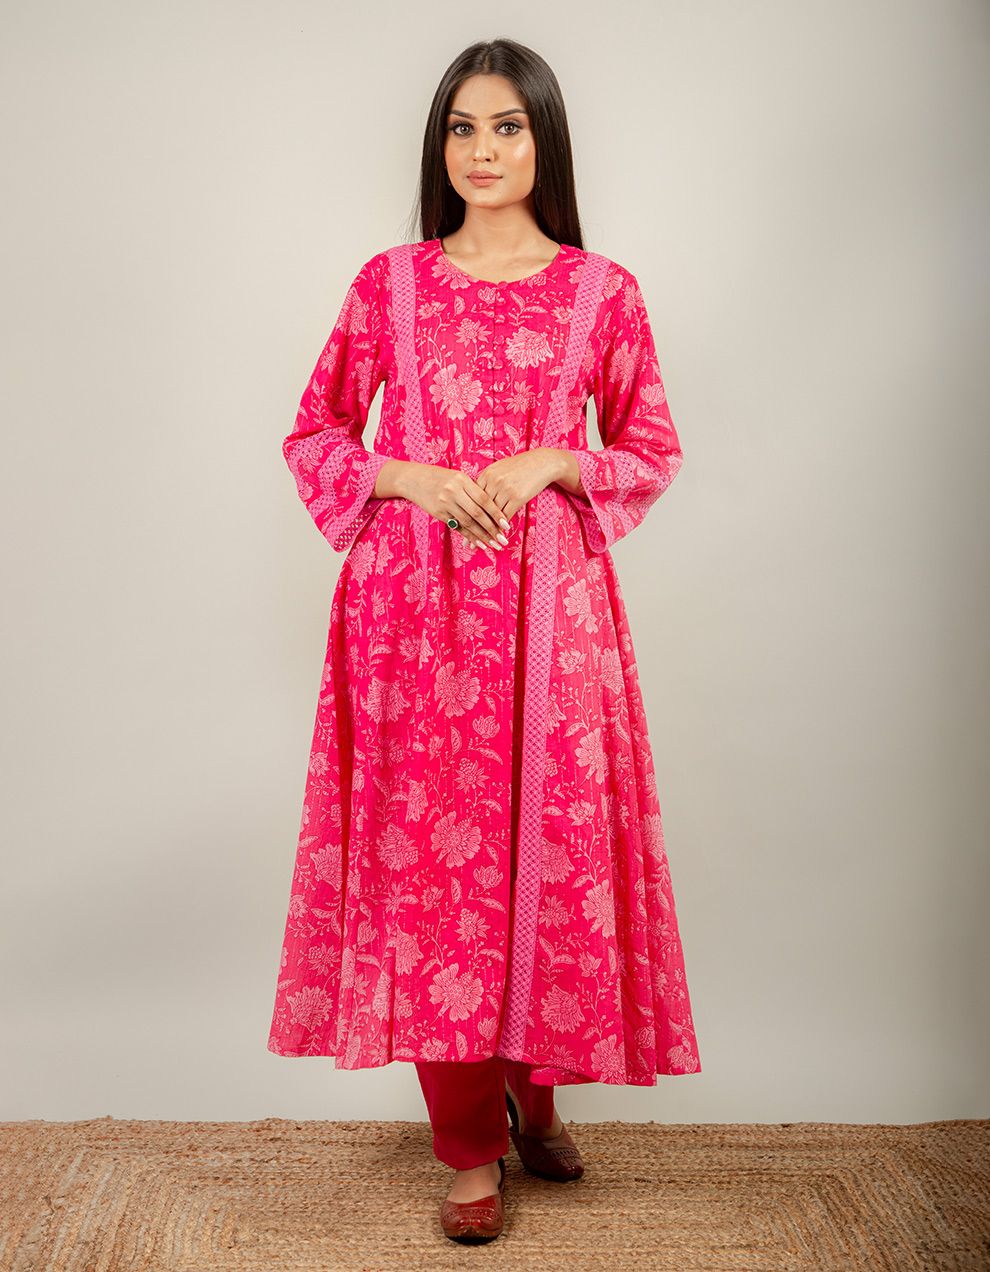 Magenta-Pink-Cotton-Kurta-with-pants-and-dupatta-designs-for-ladies-at-the-best-prices